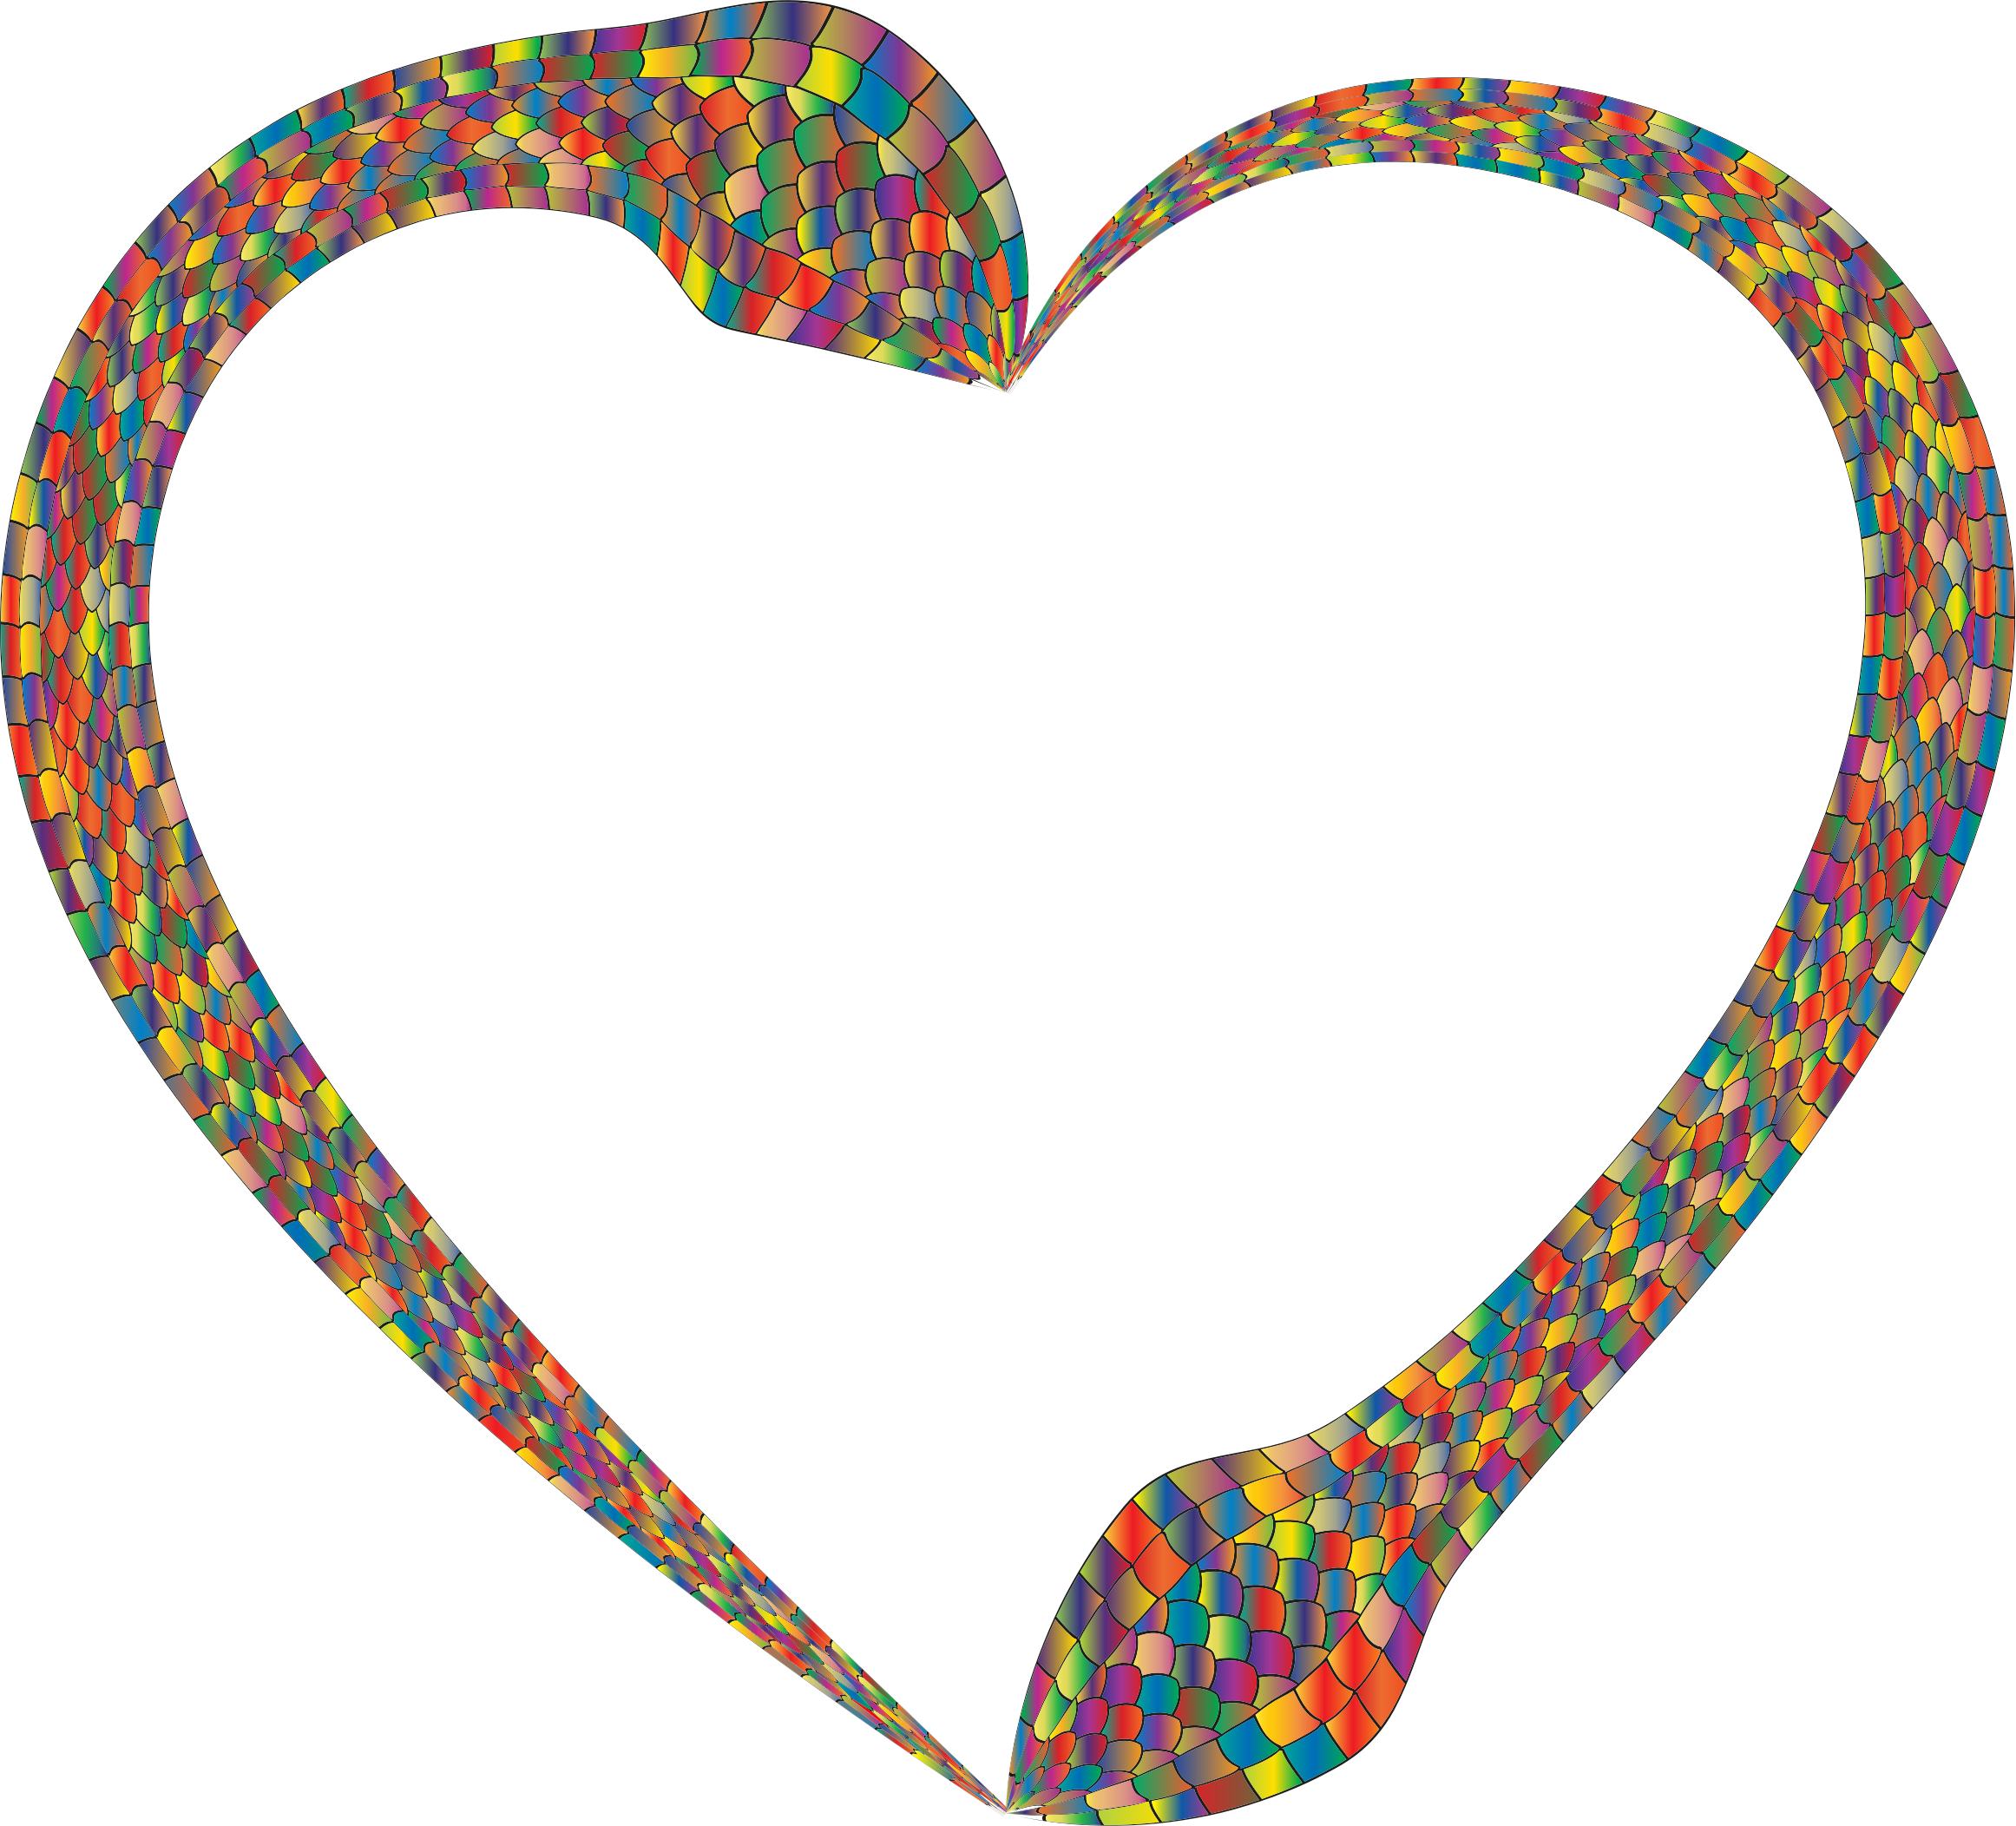 Hearted snake prismatic big. Cold clipart cold animal